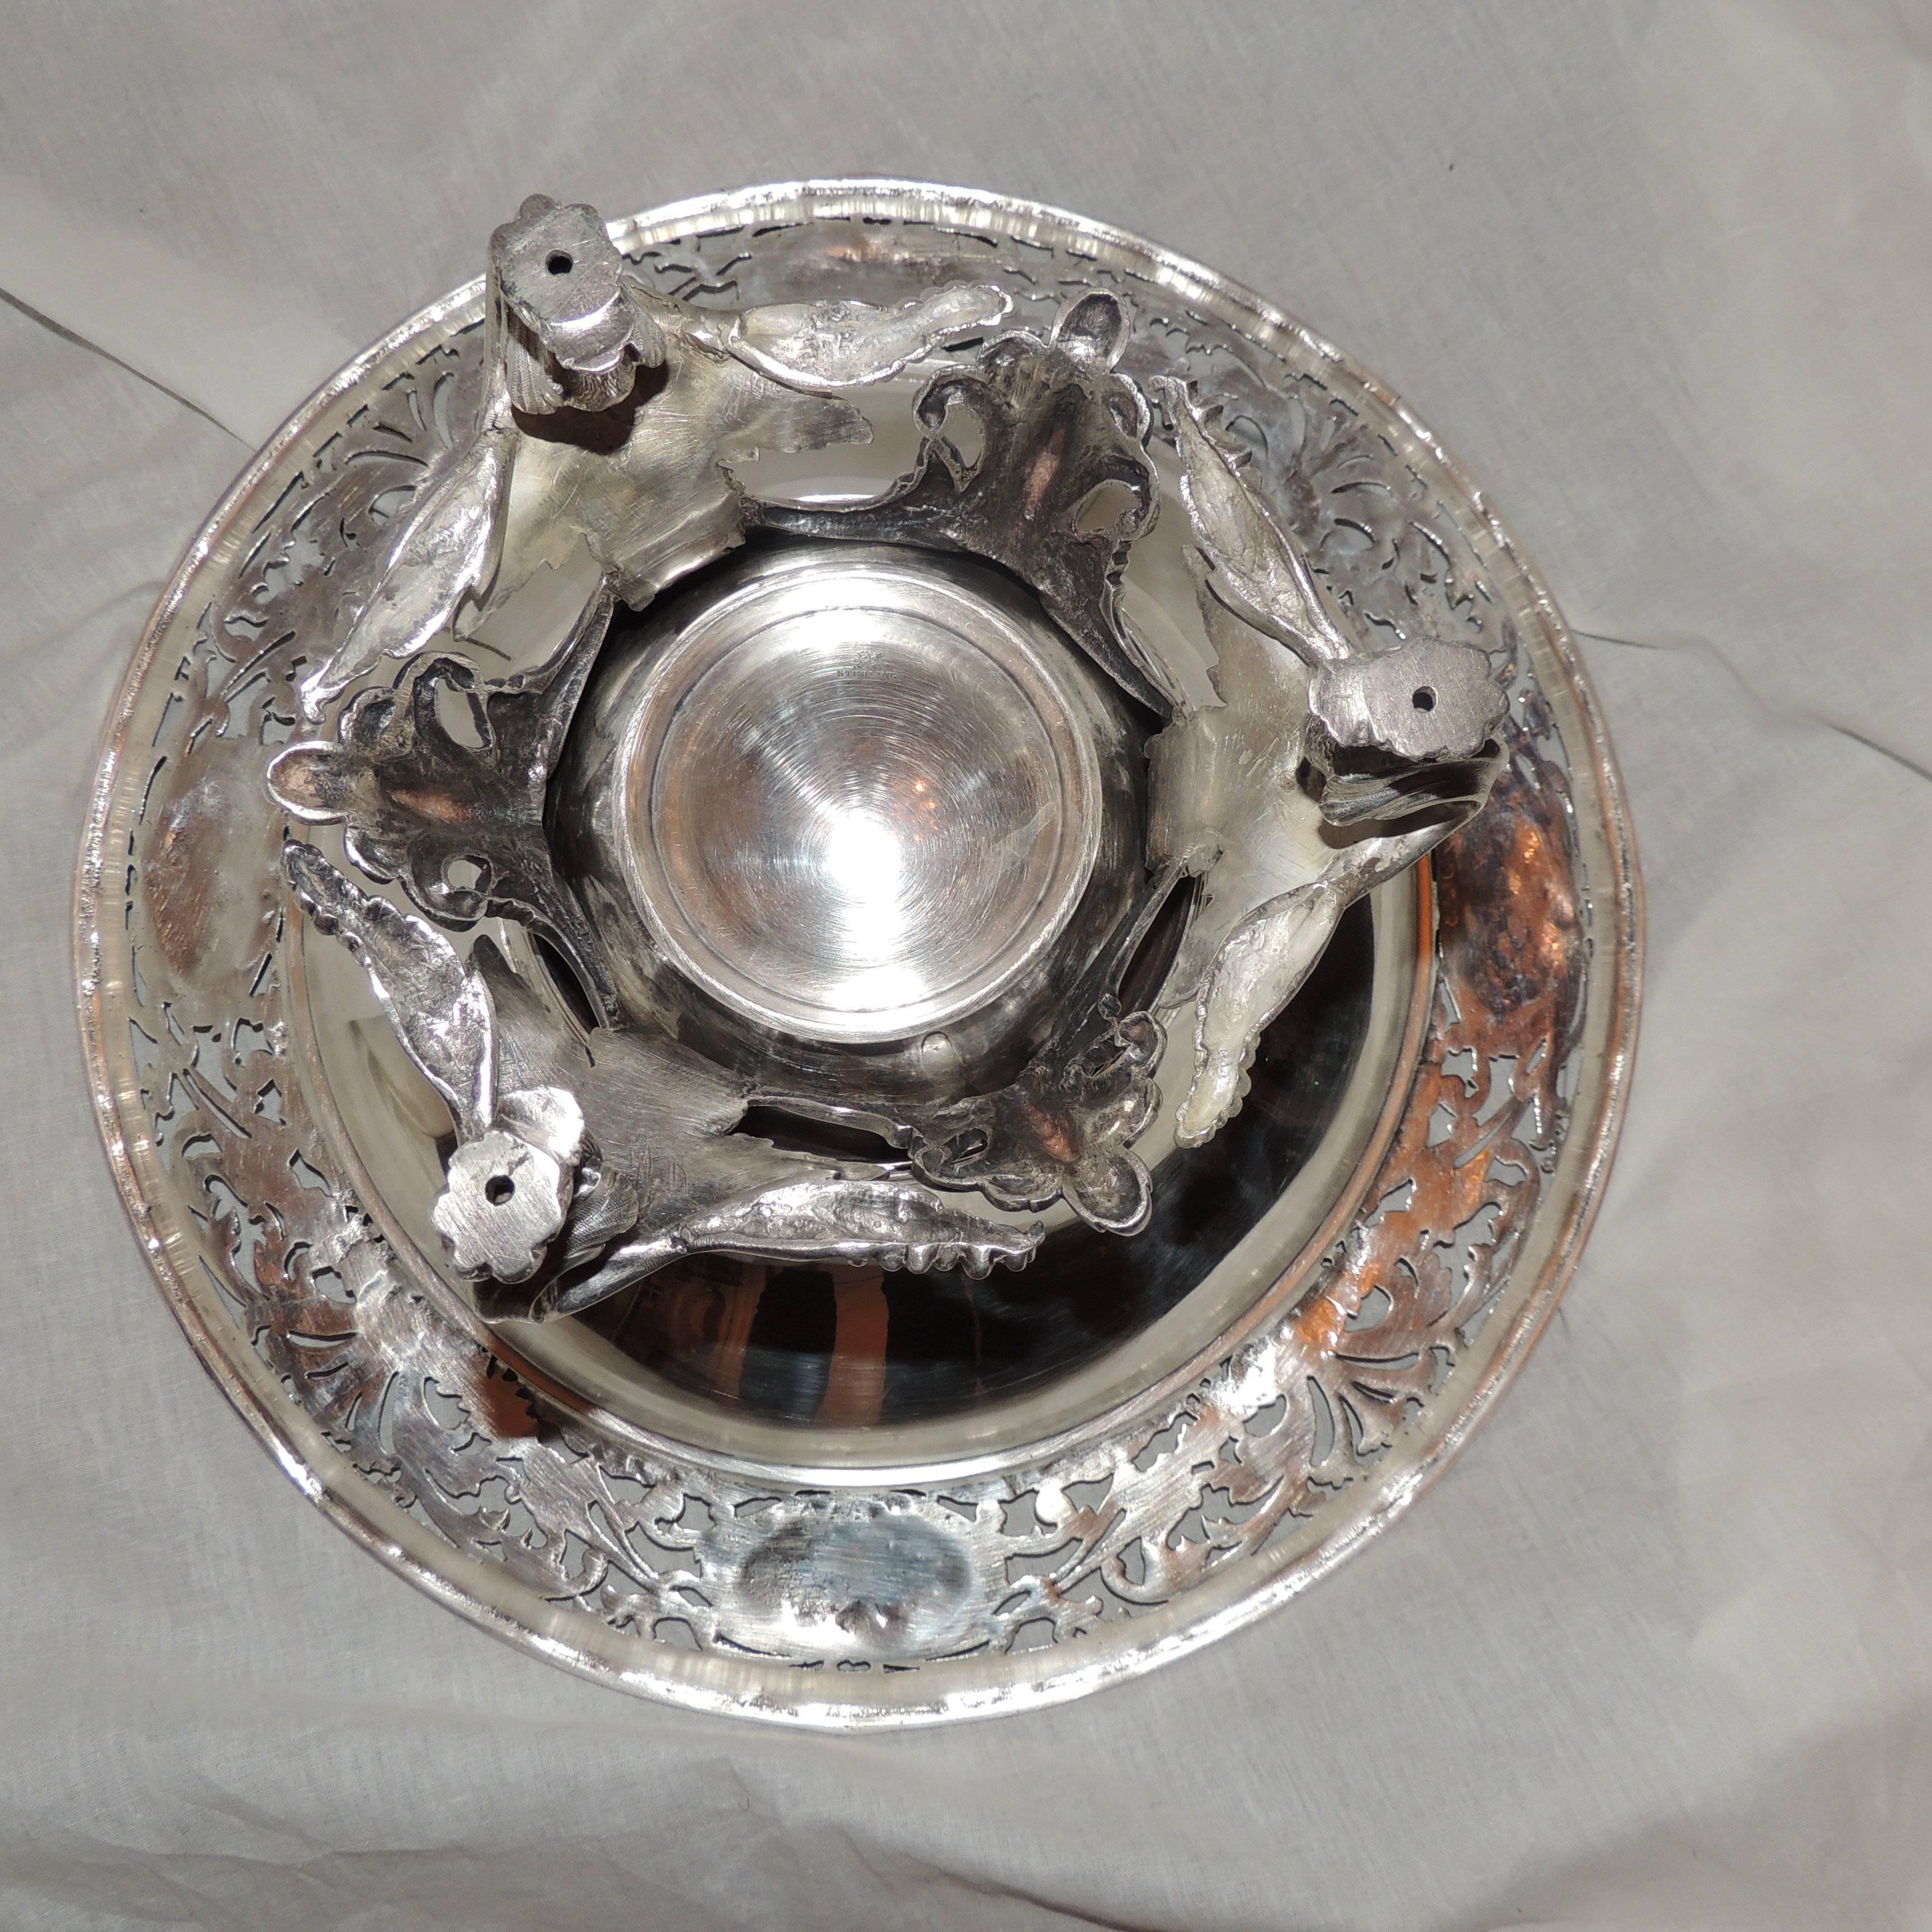 Monumental Redlich & Co. Sterling Silver Footed Floral Pierced Bowl Centerpiece 2